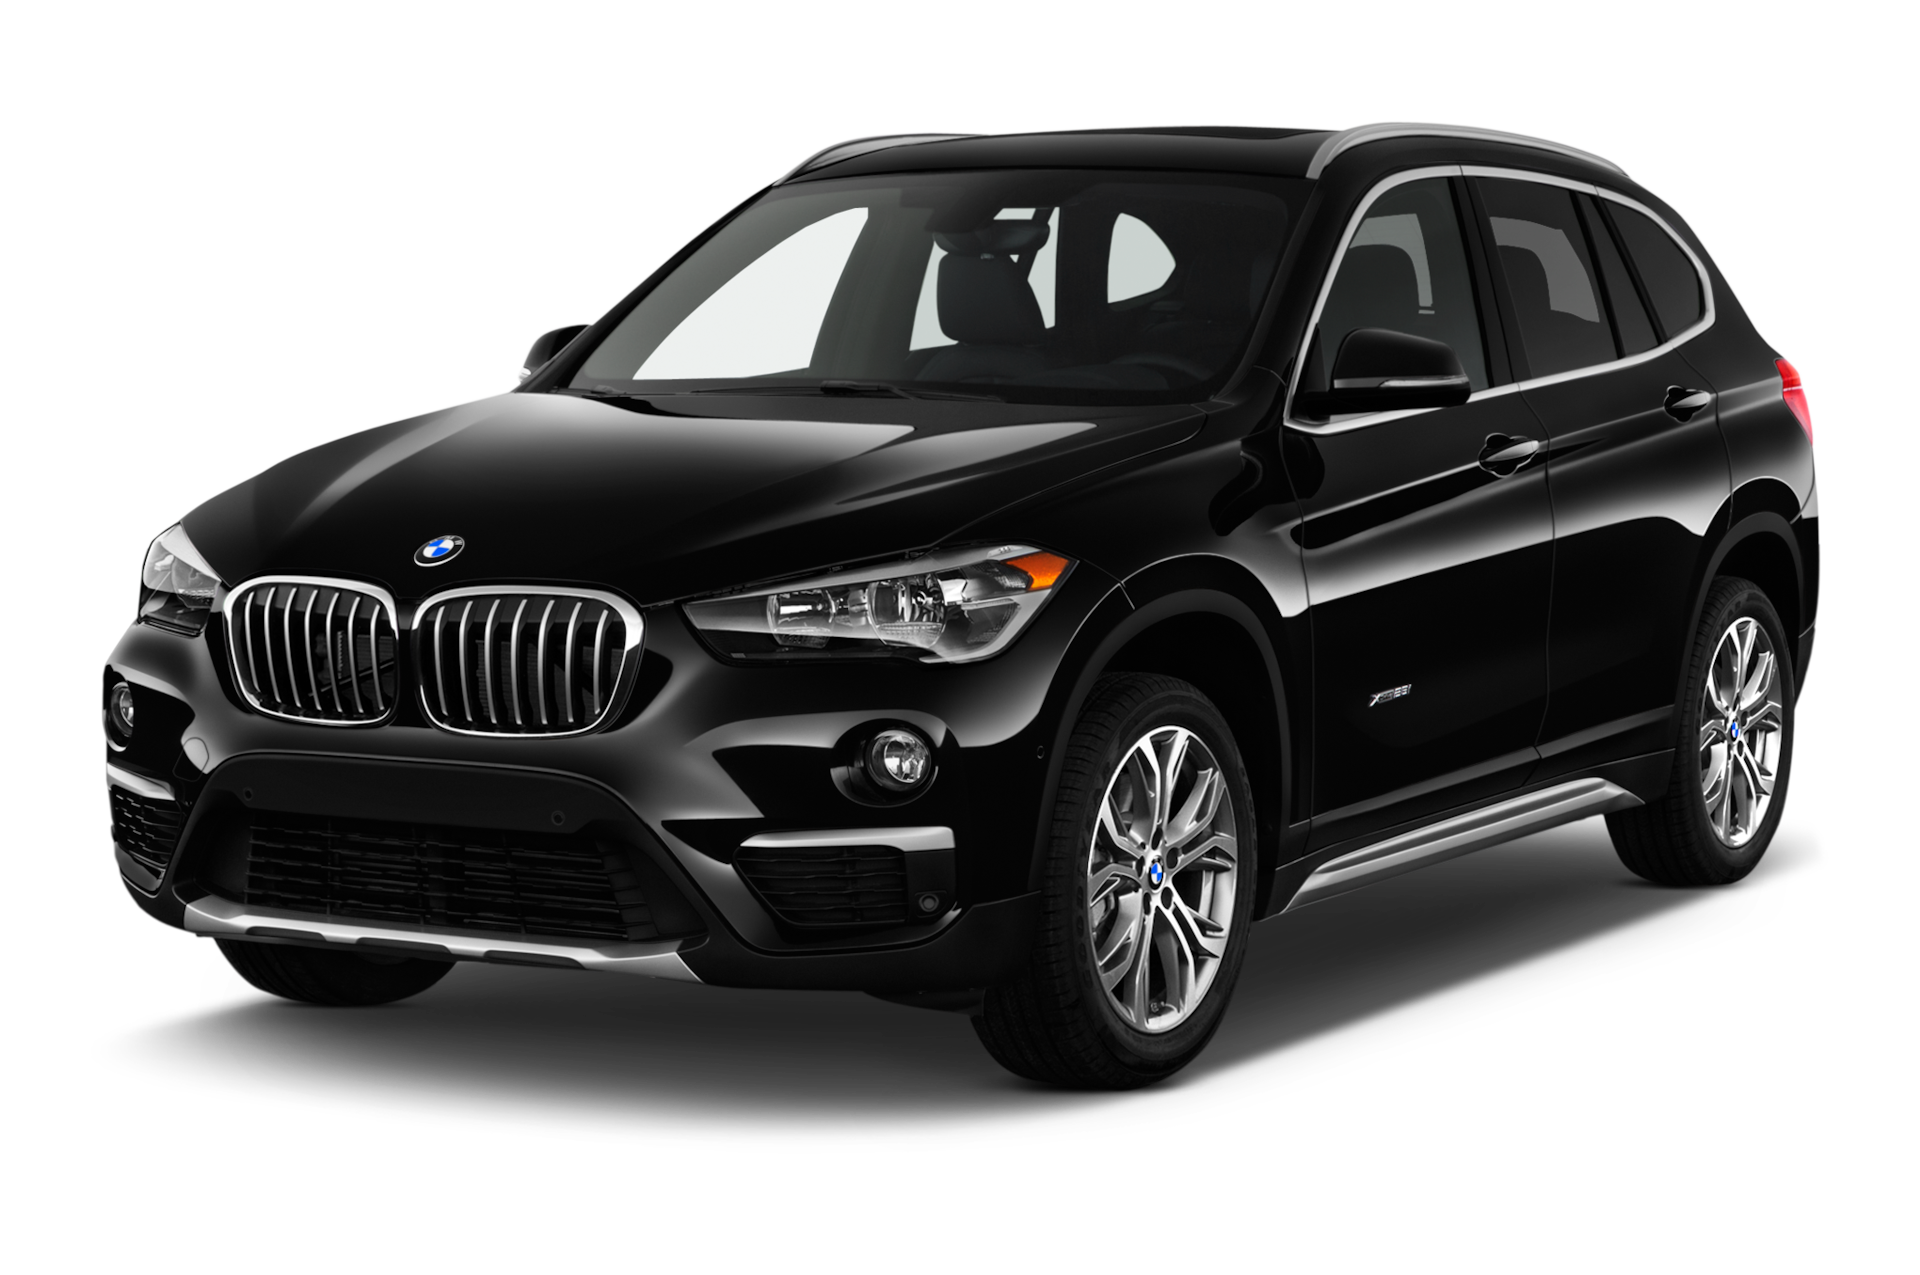 2017 BMW X1 Prices, Reviews, and Photos - MotorTrend